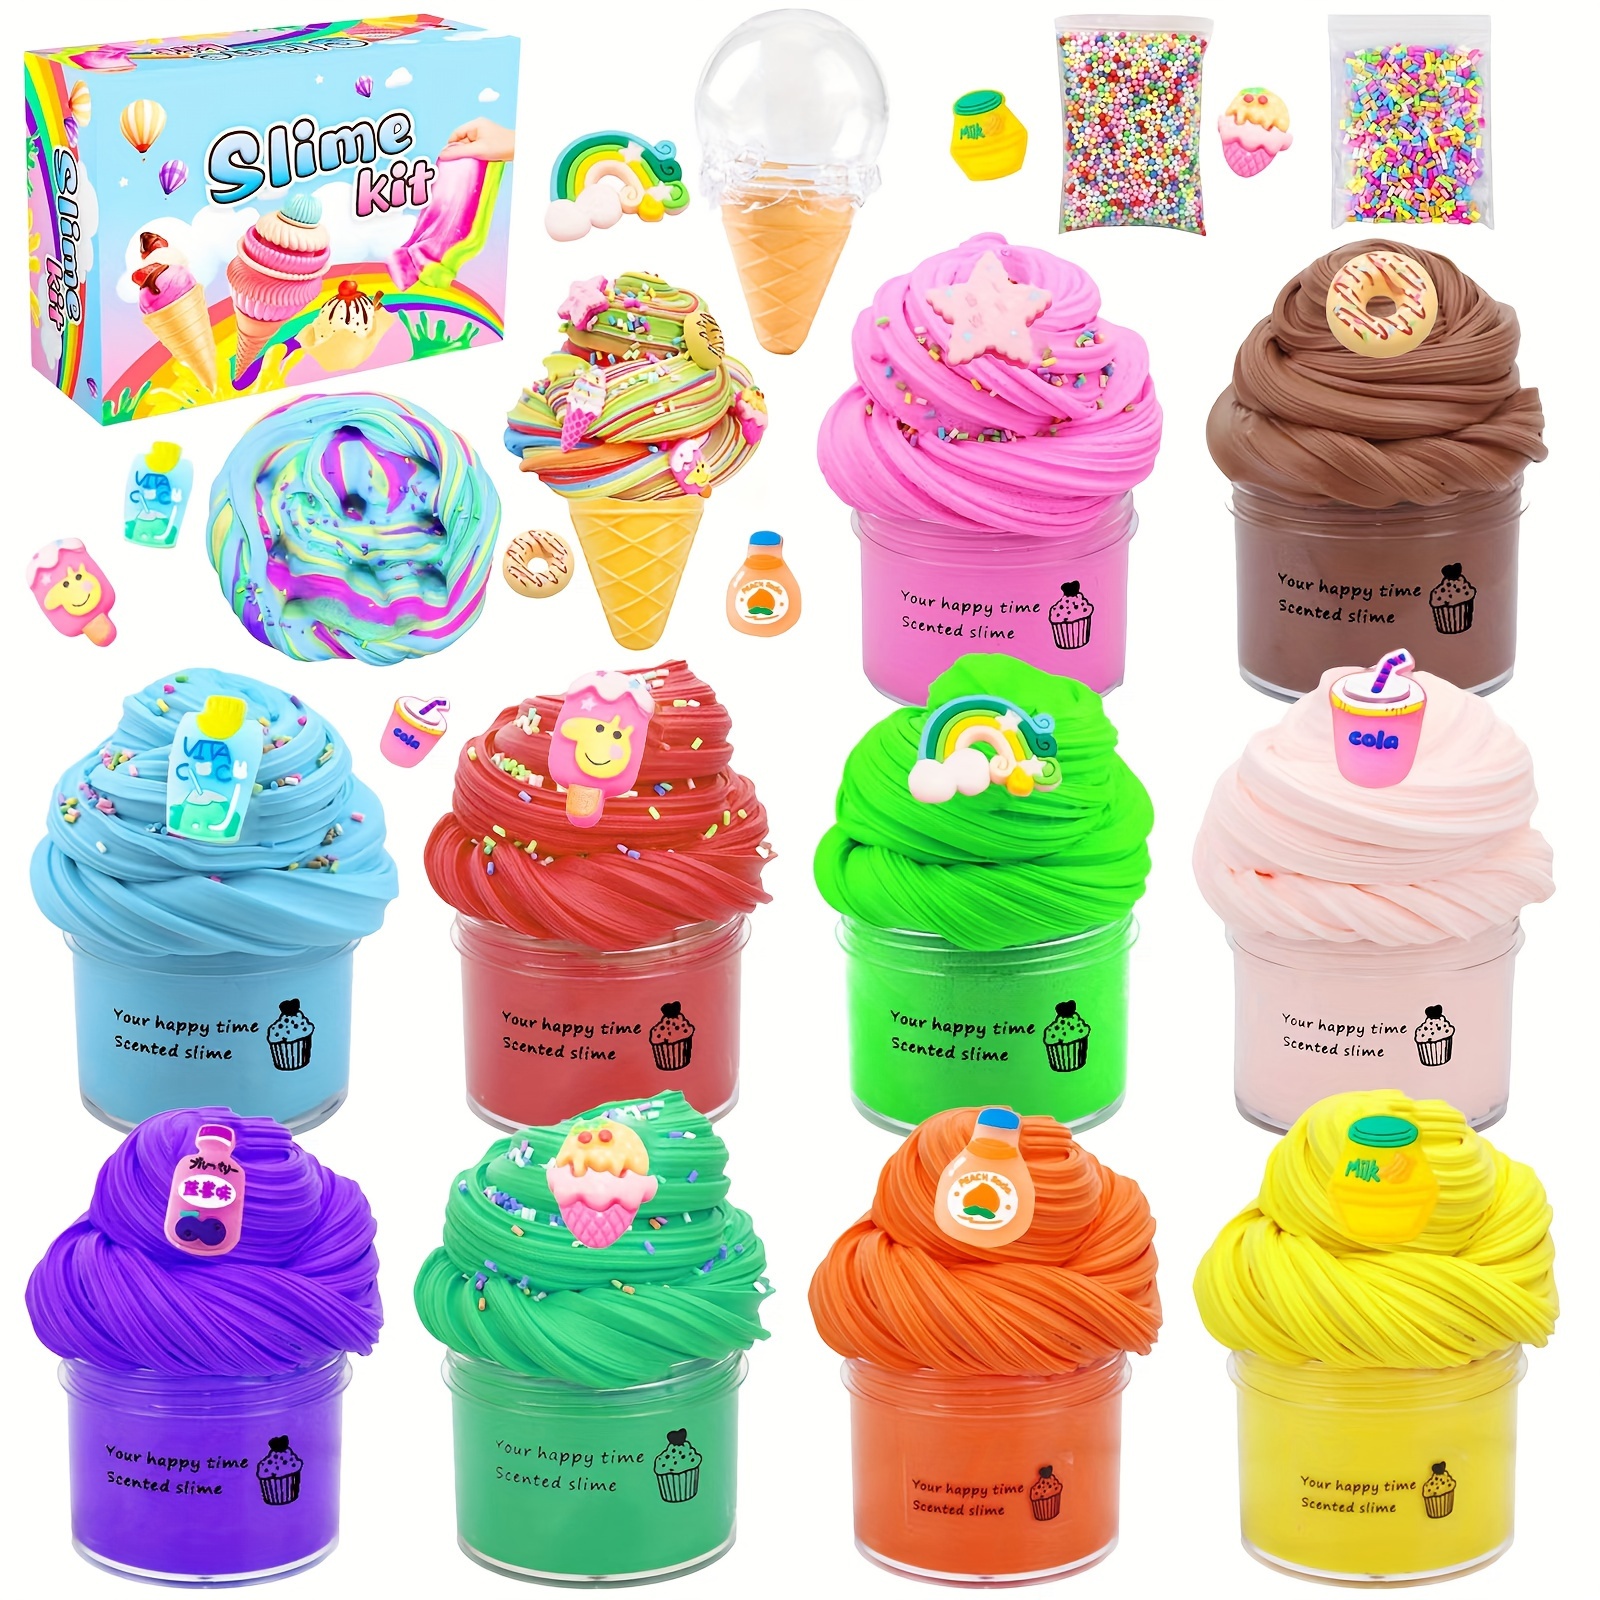 Fruit Butter Slime Kits for Kids, with Watermelon, Lemon, Peachybbies, Strawberry, Avocado and Cherry Charm,Cute Stuff for Girls Fragrant DIY Slime